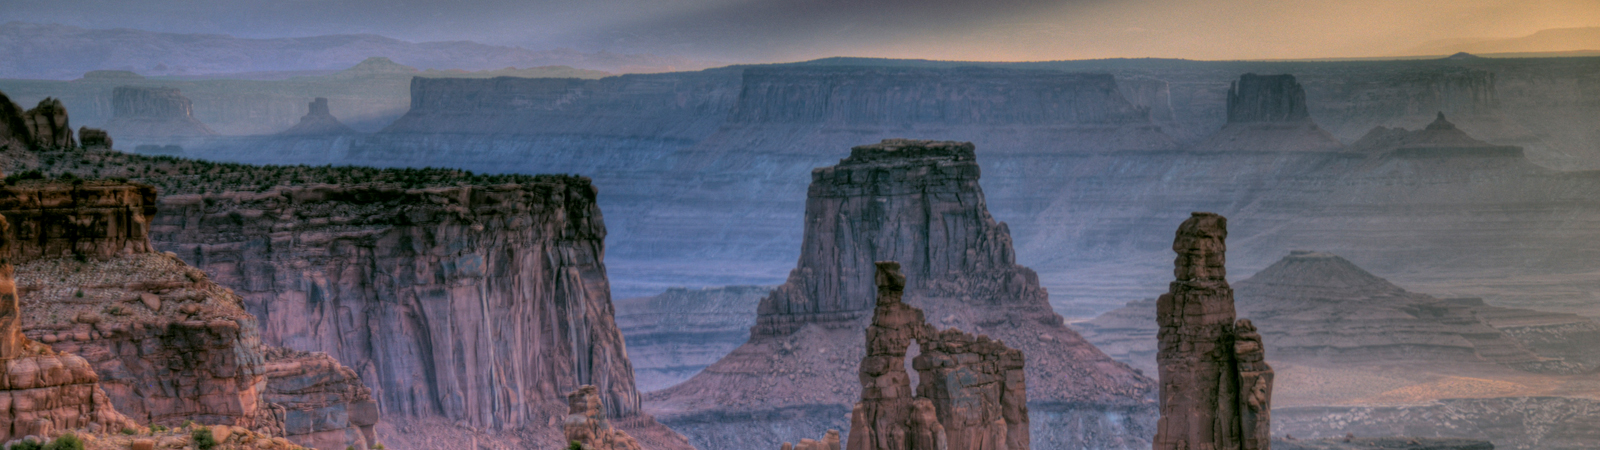 Best of the Canyonlands - featuring Utah's Mighty 5